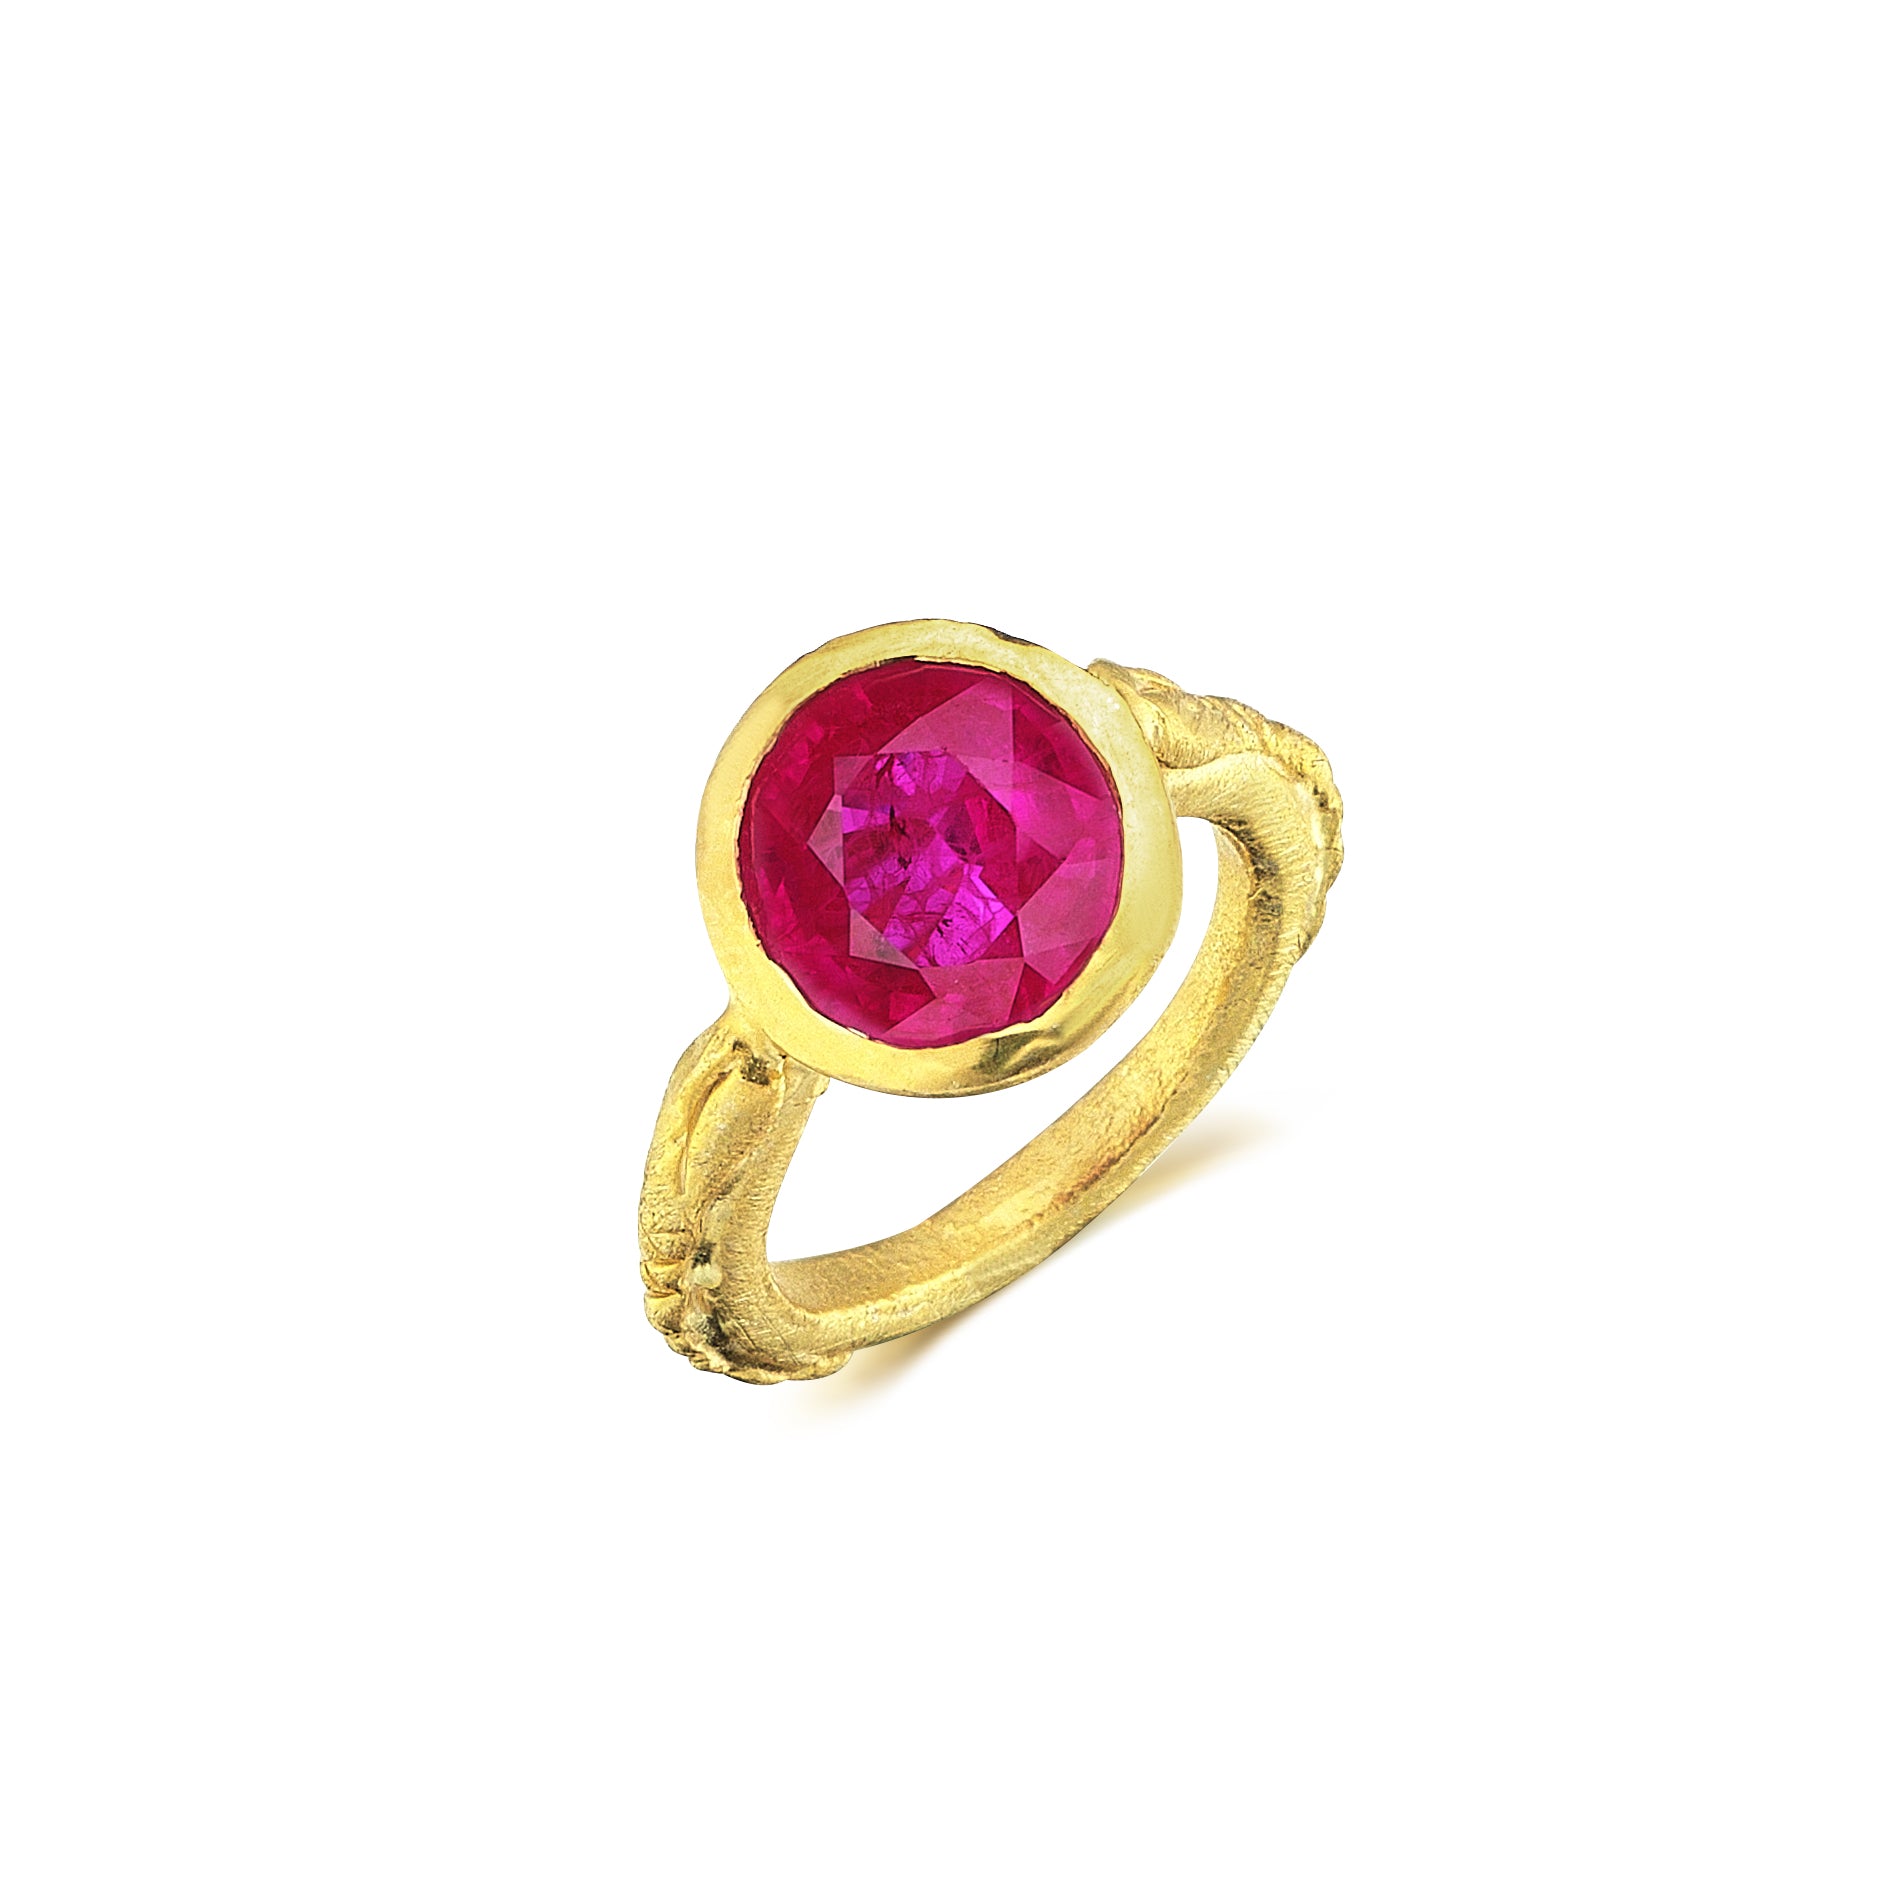 THE PINK RUBY RING